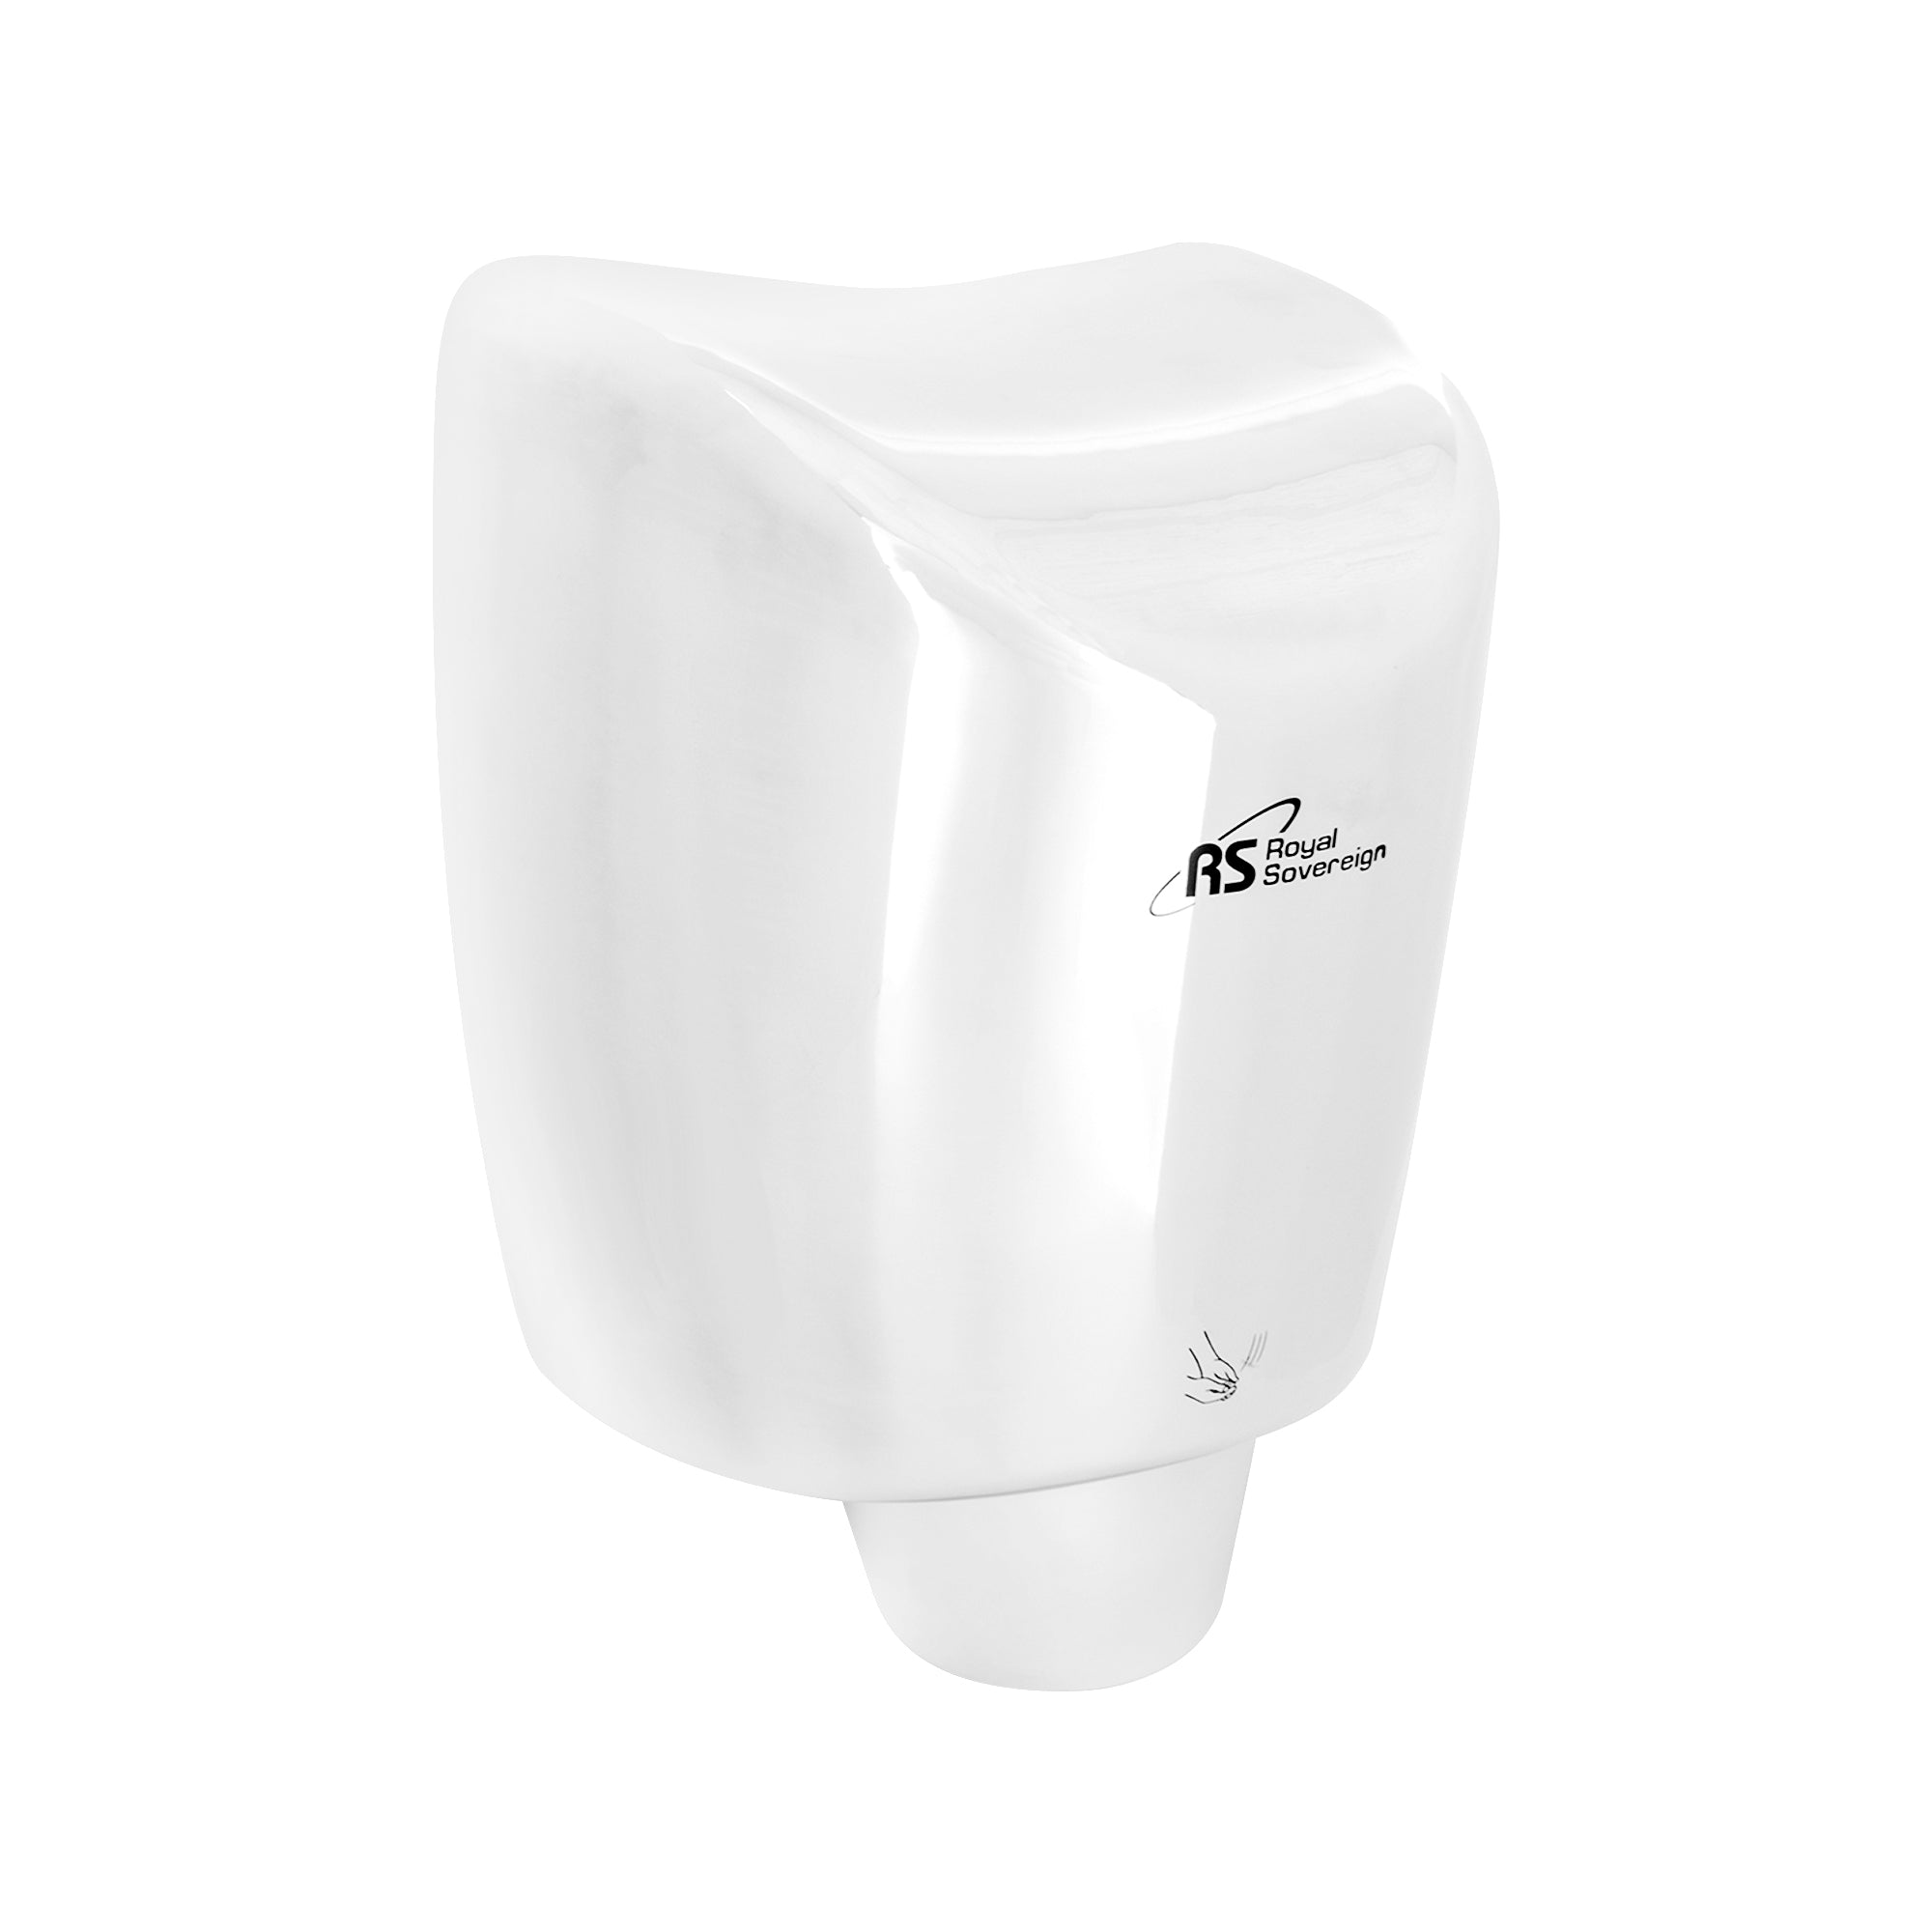 RTHD-431SS, High Efficiency Touchless Automatic Hand Dryer